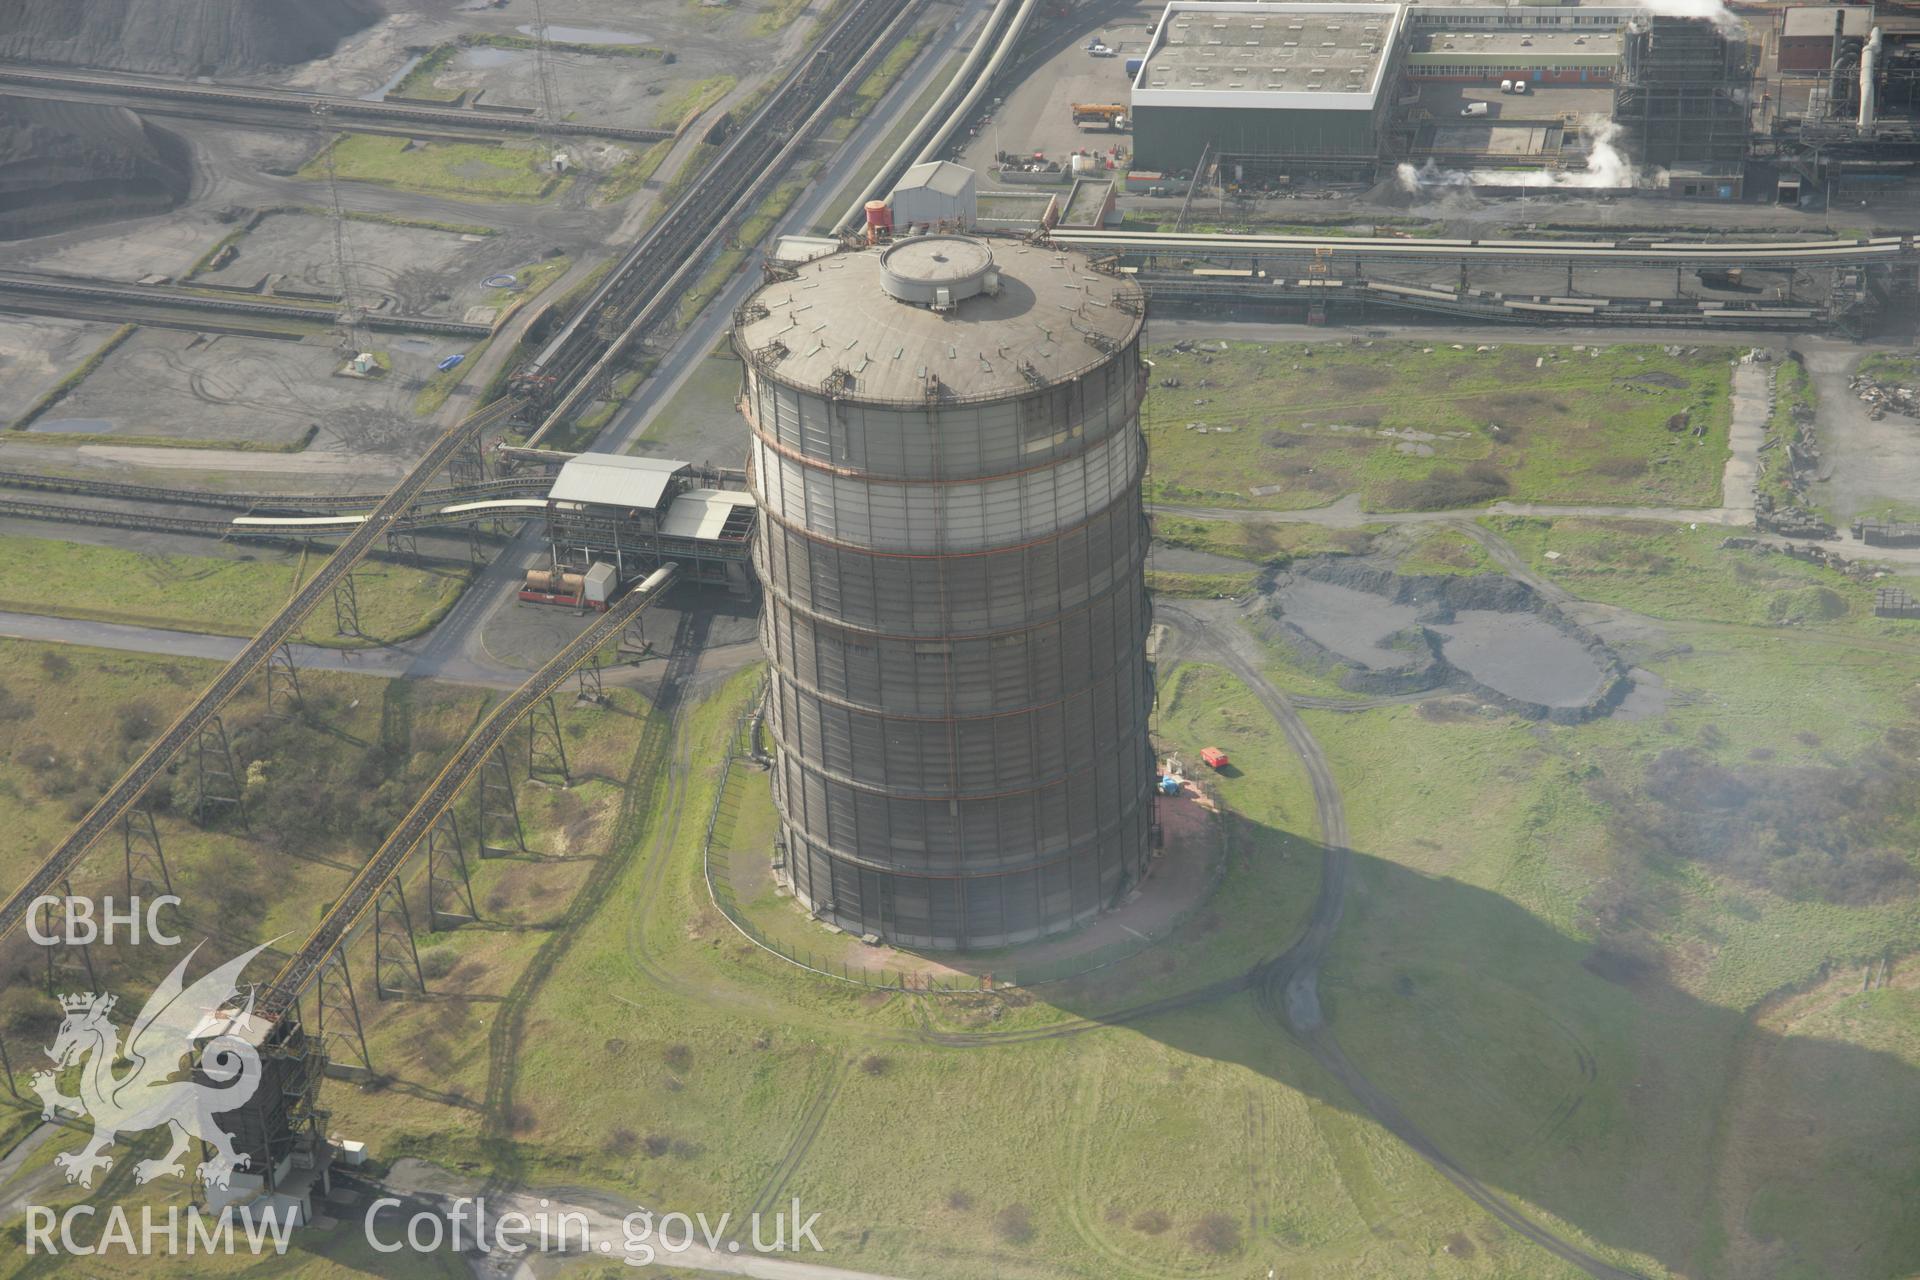 RCAHMW colour oblique aerial photograph of Abbey Works, Margam Steel Works, Margam. Taken on 16 March 2007 by Toby Driver